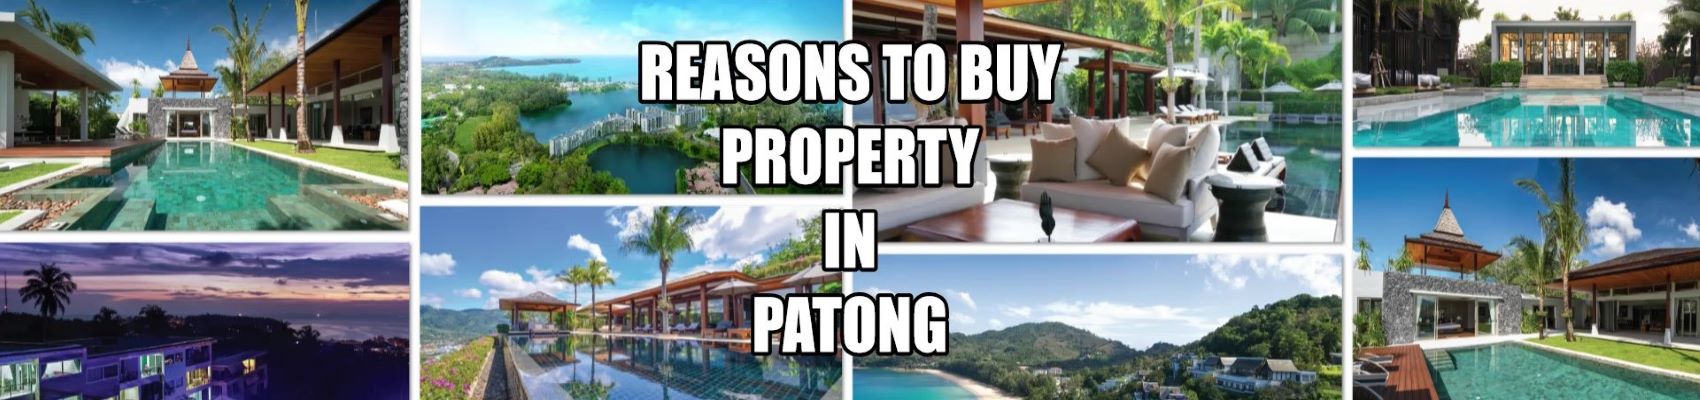 Immobilienkauf in Patong